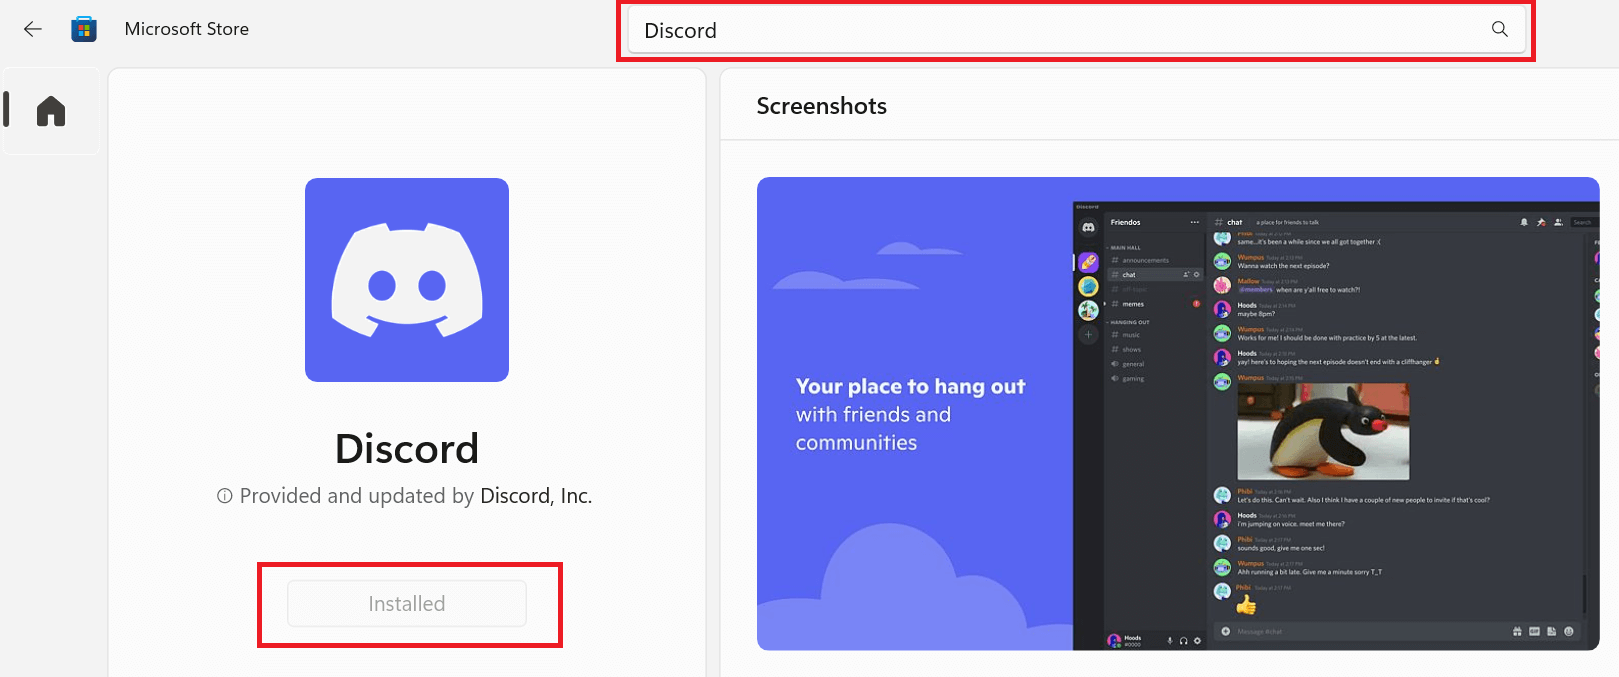 Discord's app page in Microsoft Store.